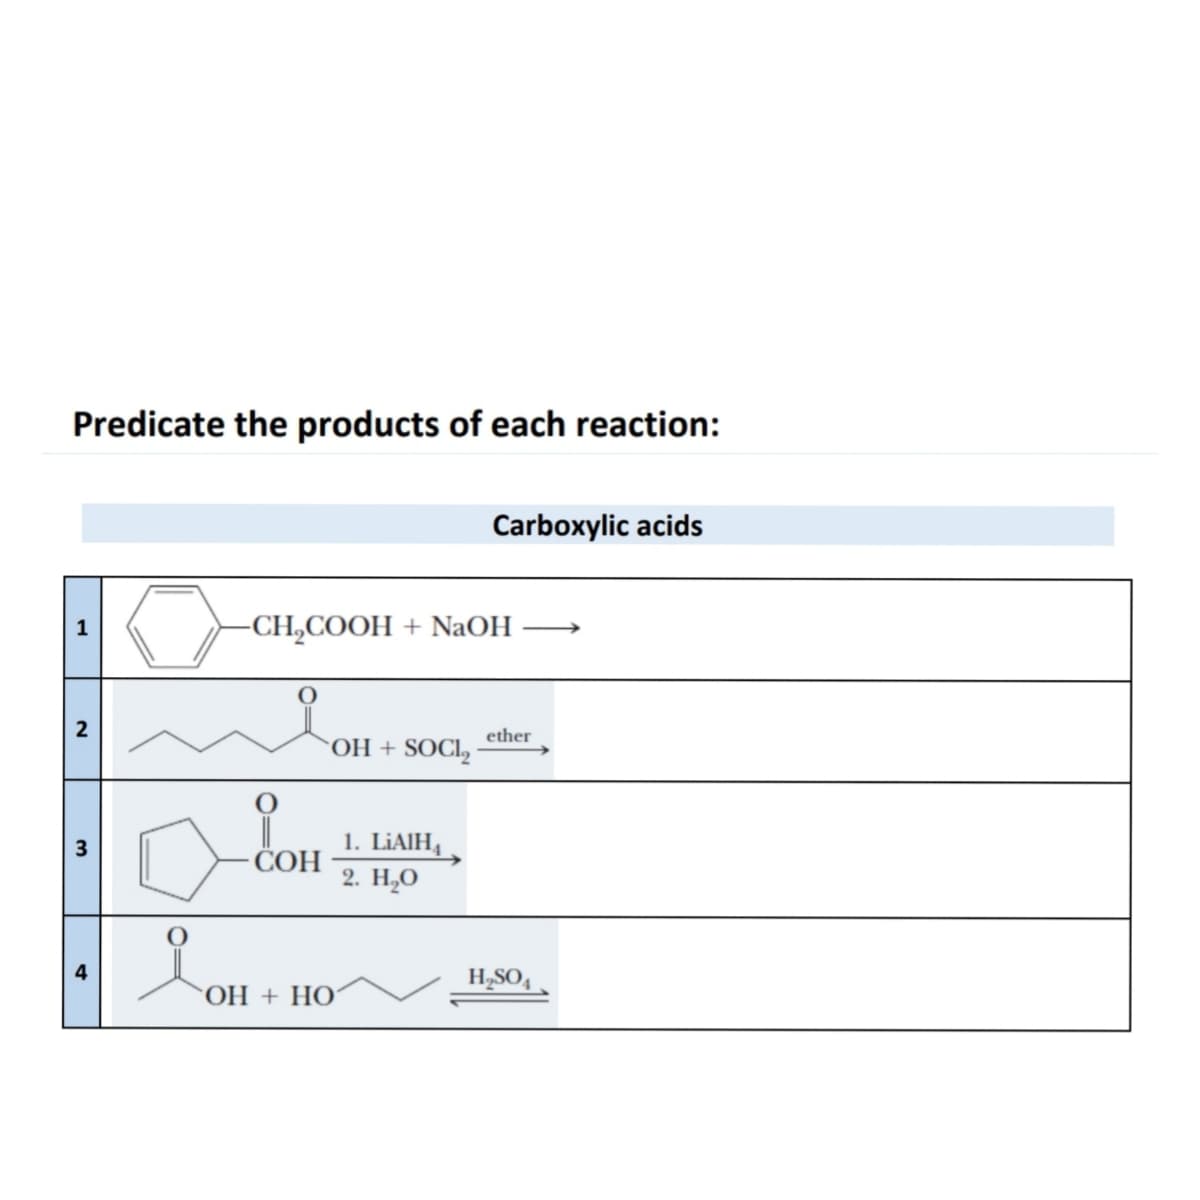 Predicate the products of each reaction:
-
2
3
4
-CH₂COOH + NaOH
COH
OH + HO
OH + SOCI₂
Carboxylic acids
1. LiAlH4
2. H₂O
ether
H₂SO4